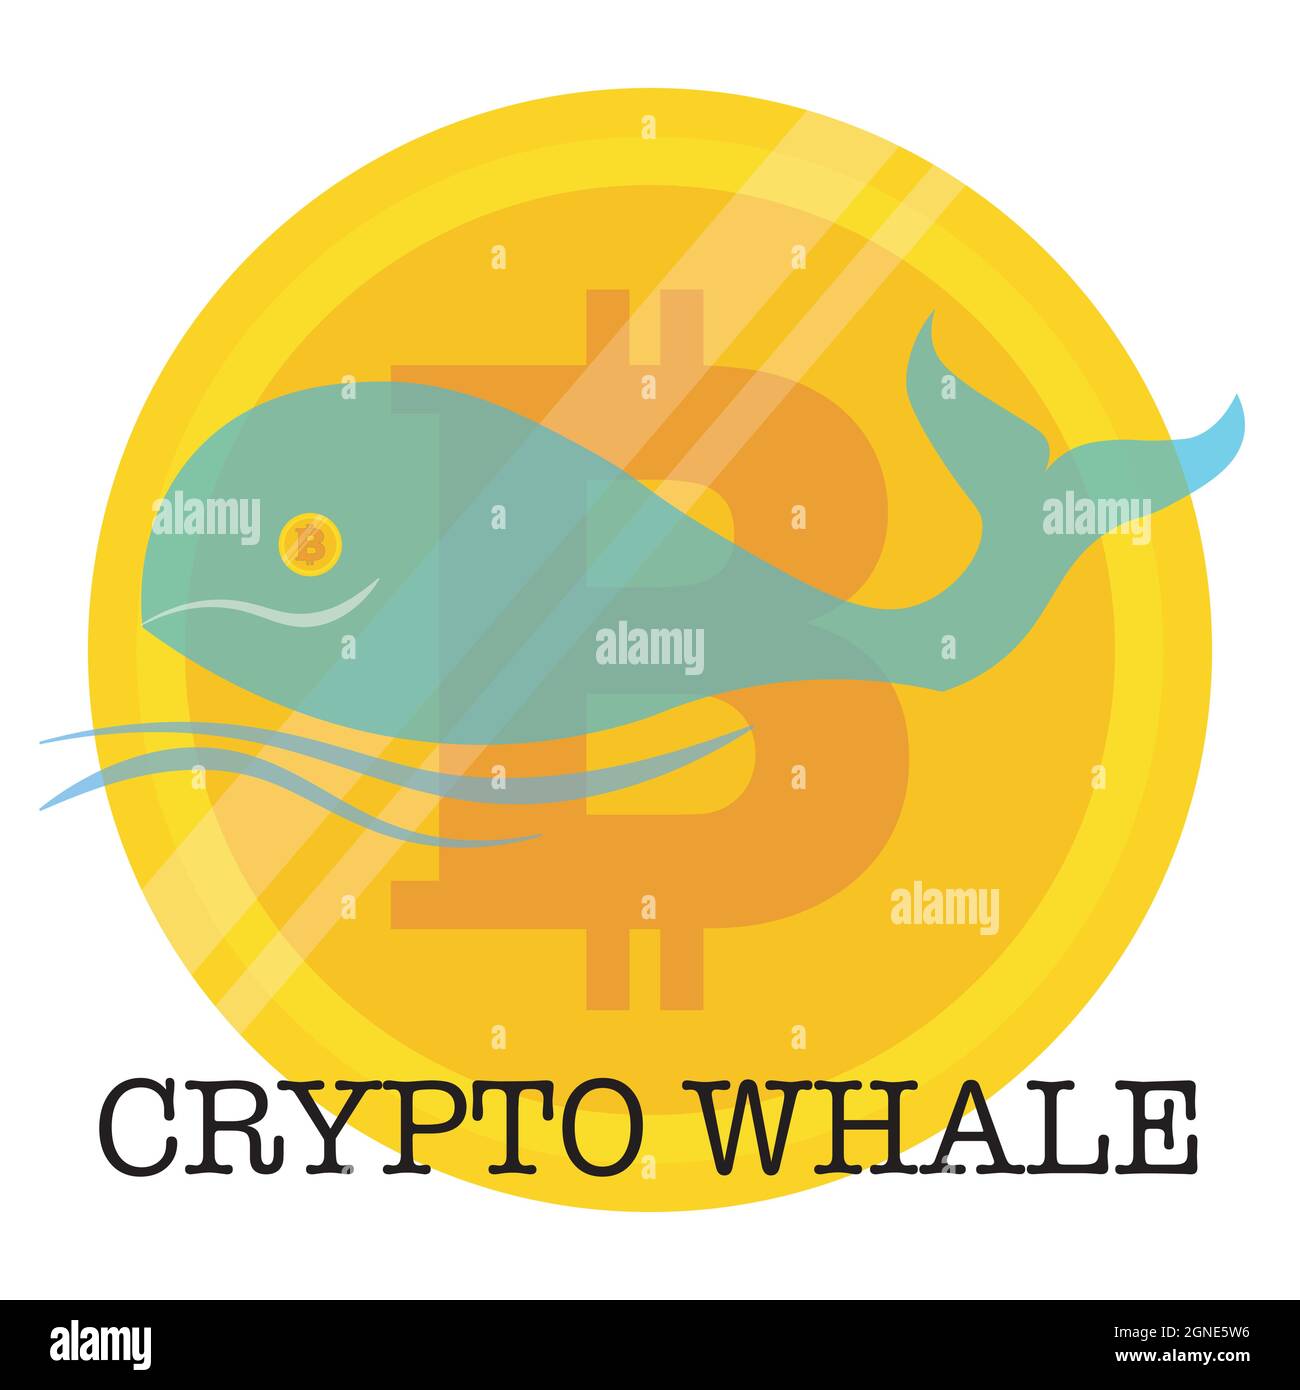 Crypto Whale consept vector illustration on a white background Stock Vector